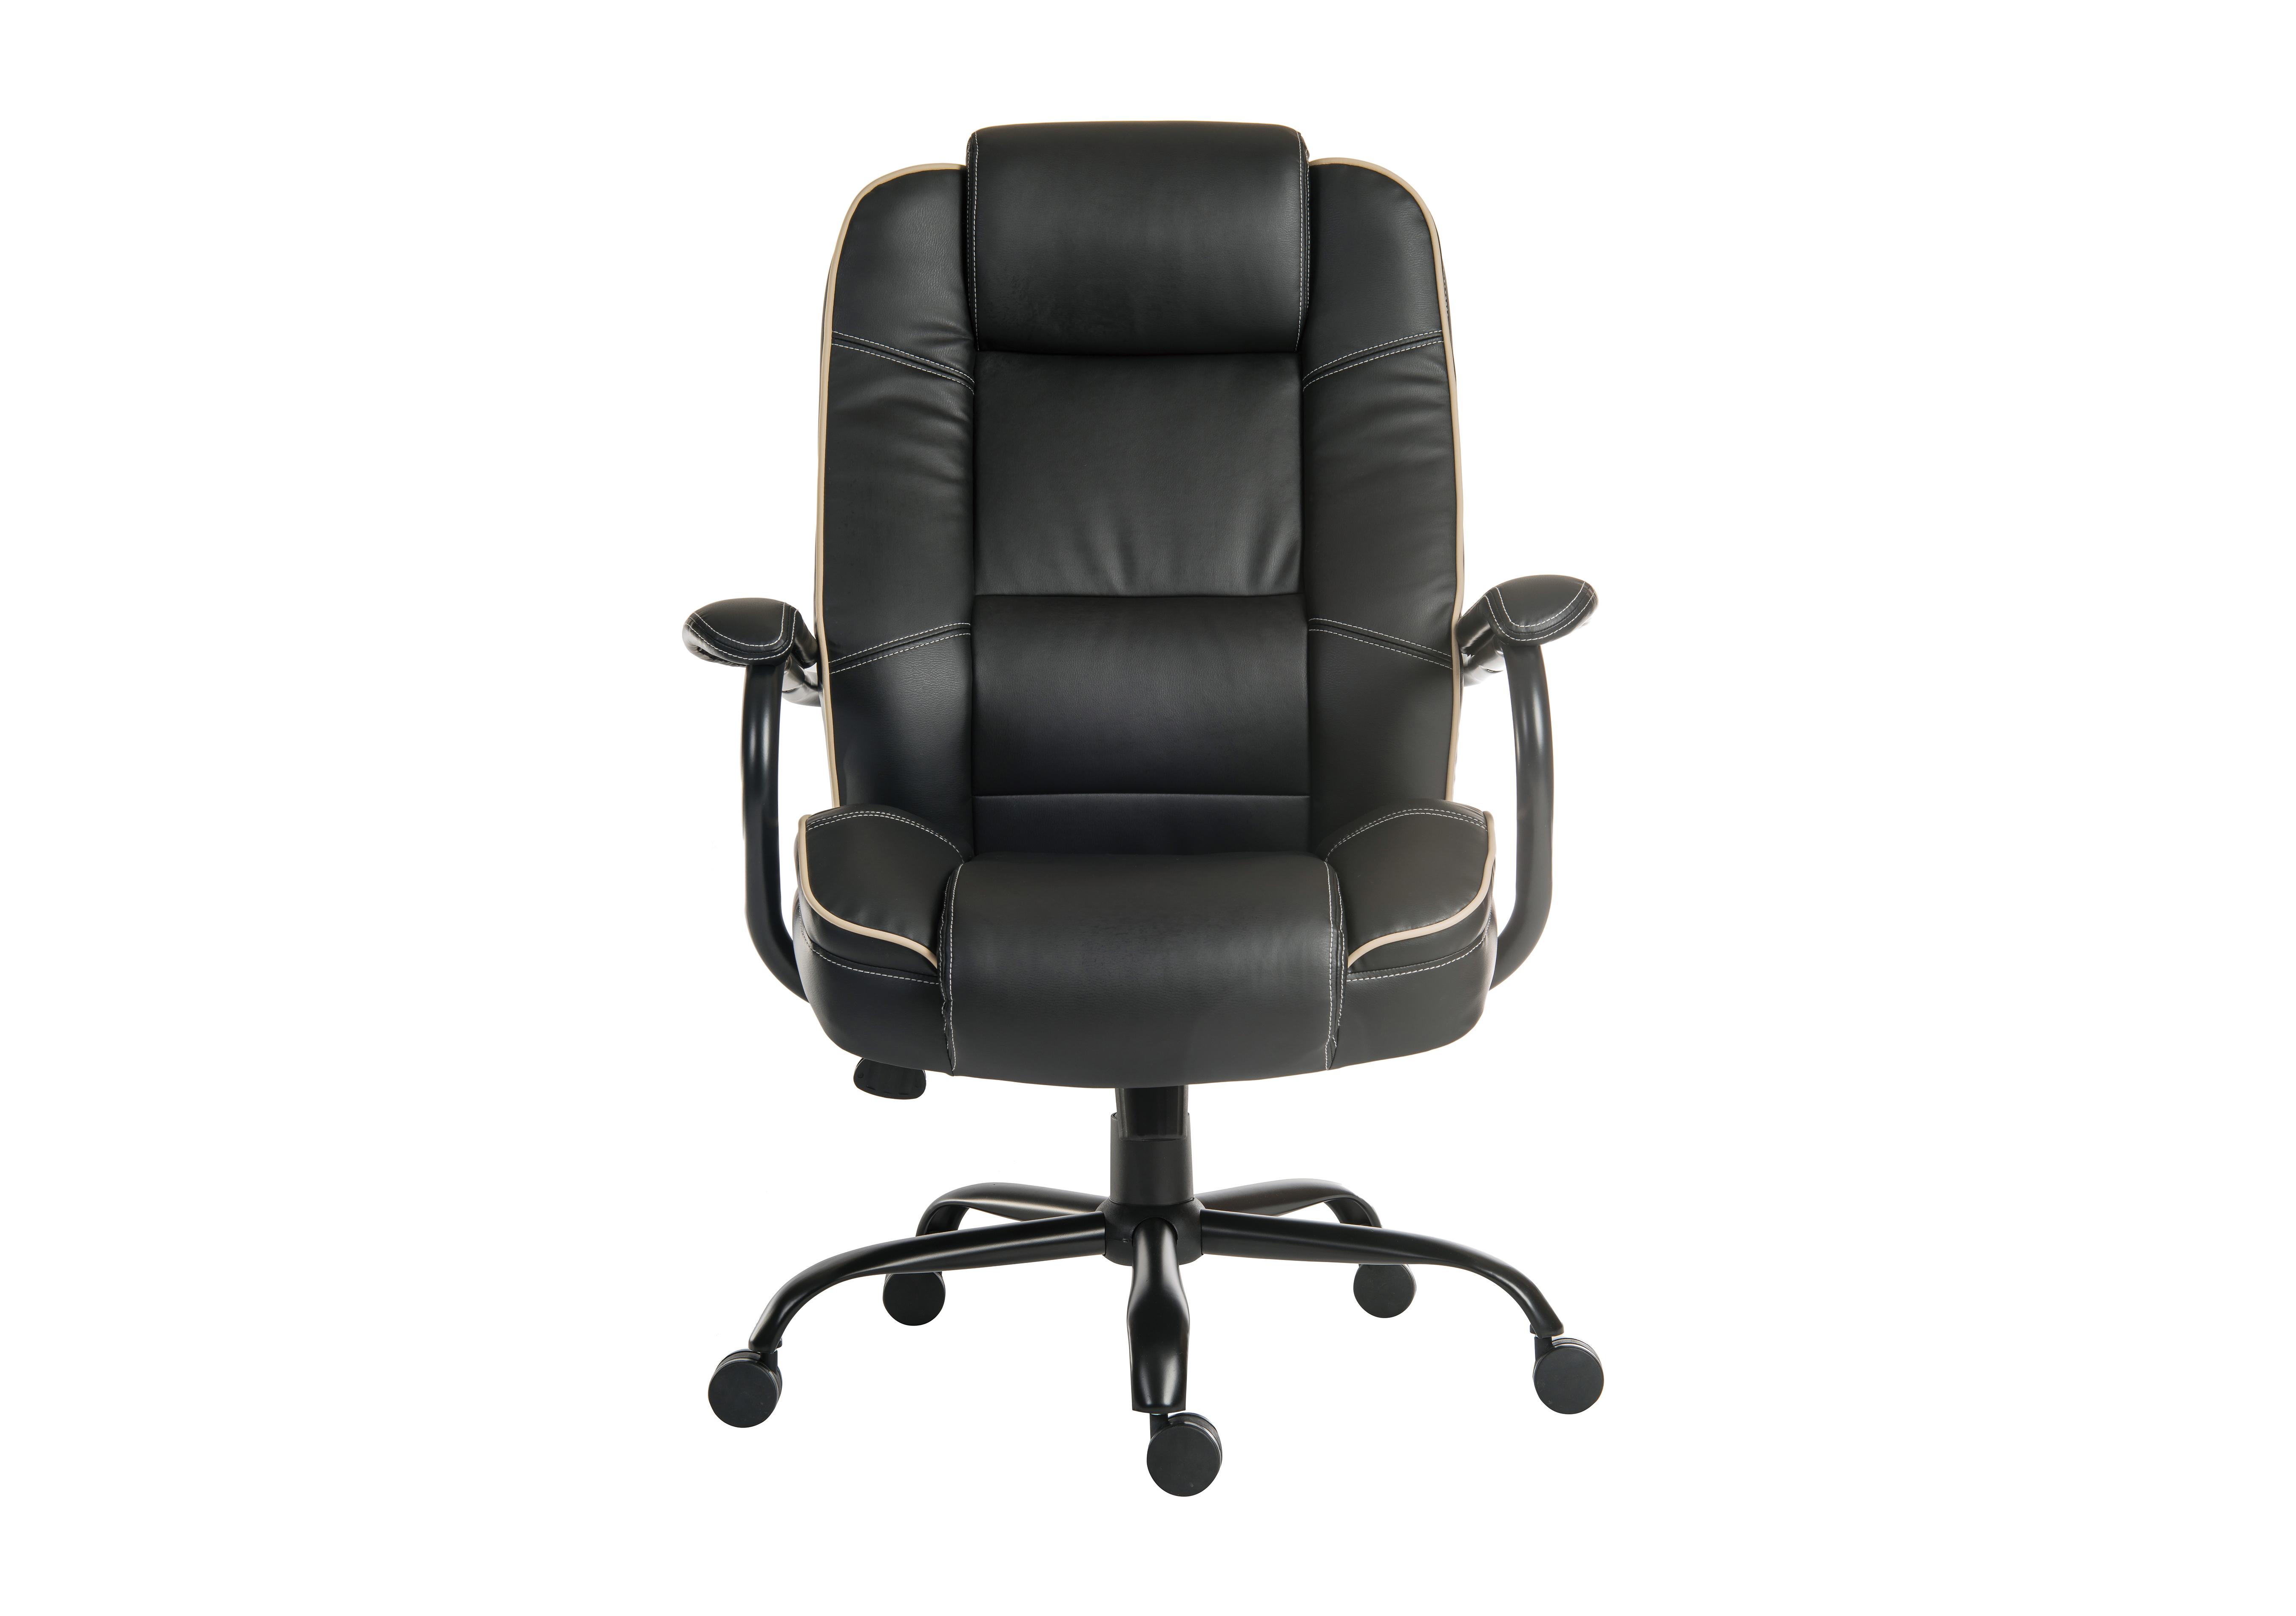 East River Goliath Chair in Black on Furniture Village